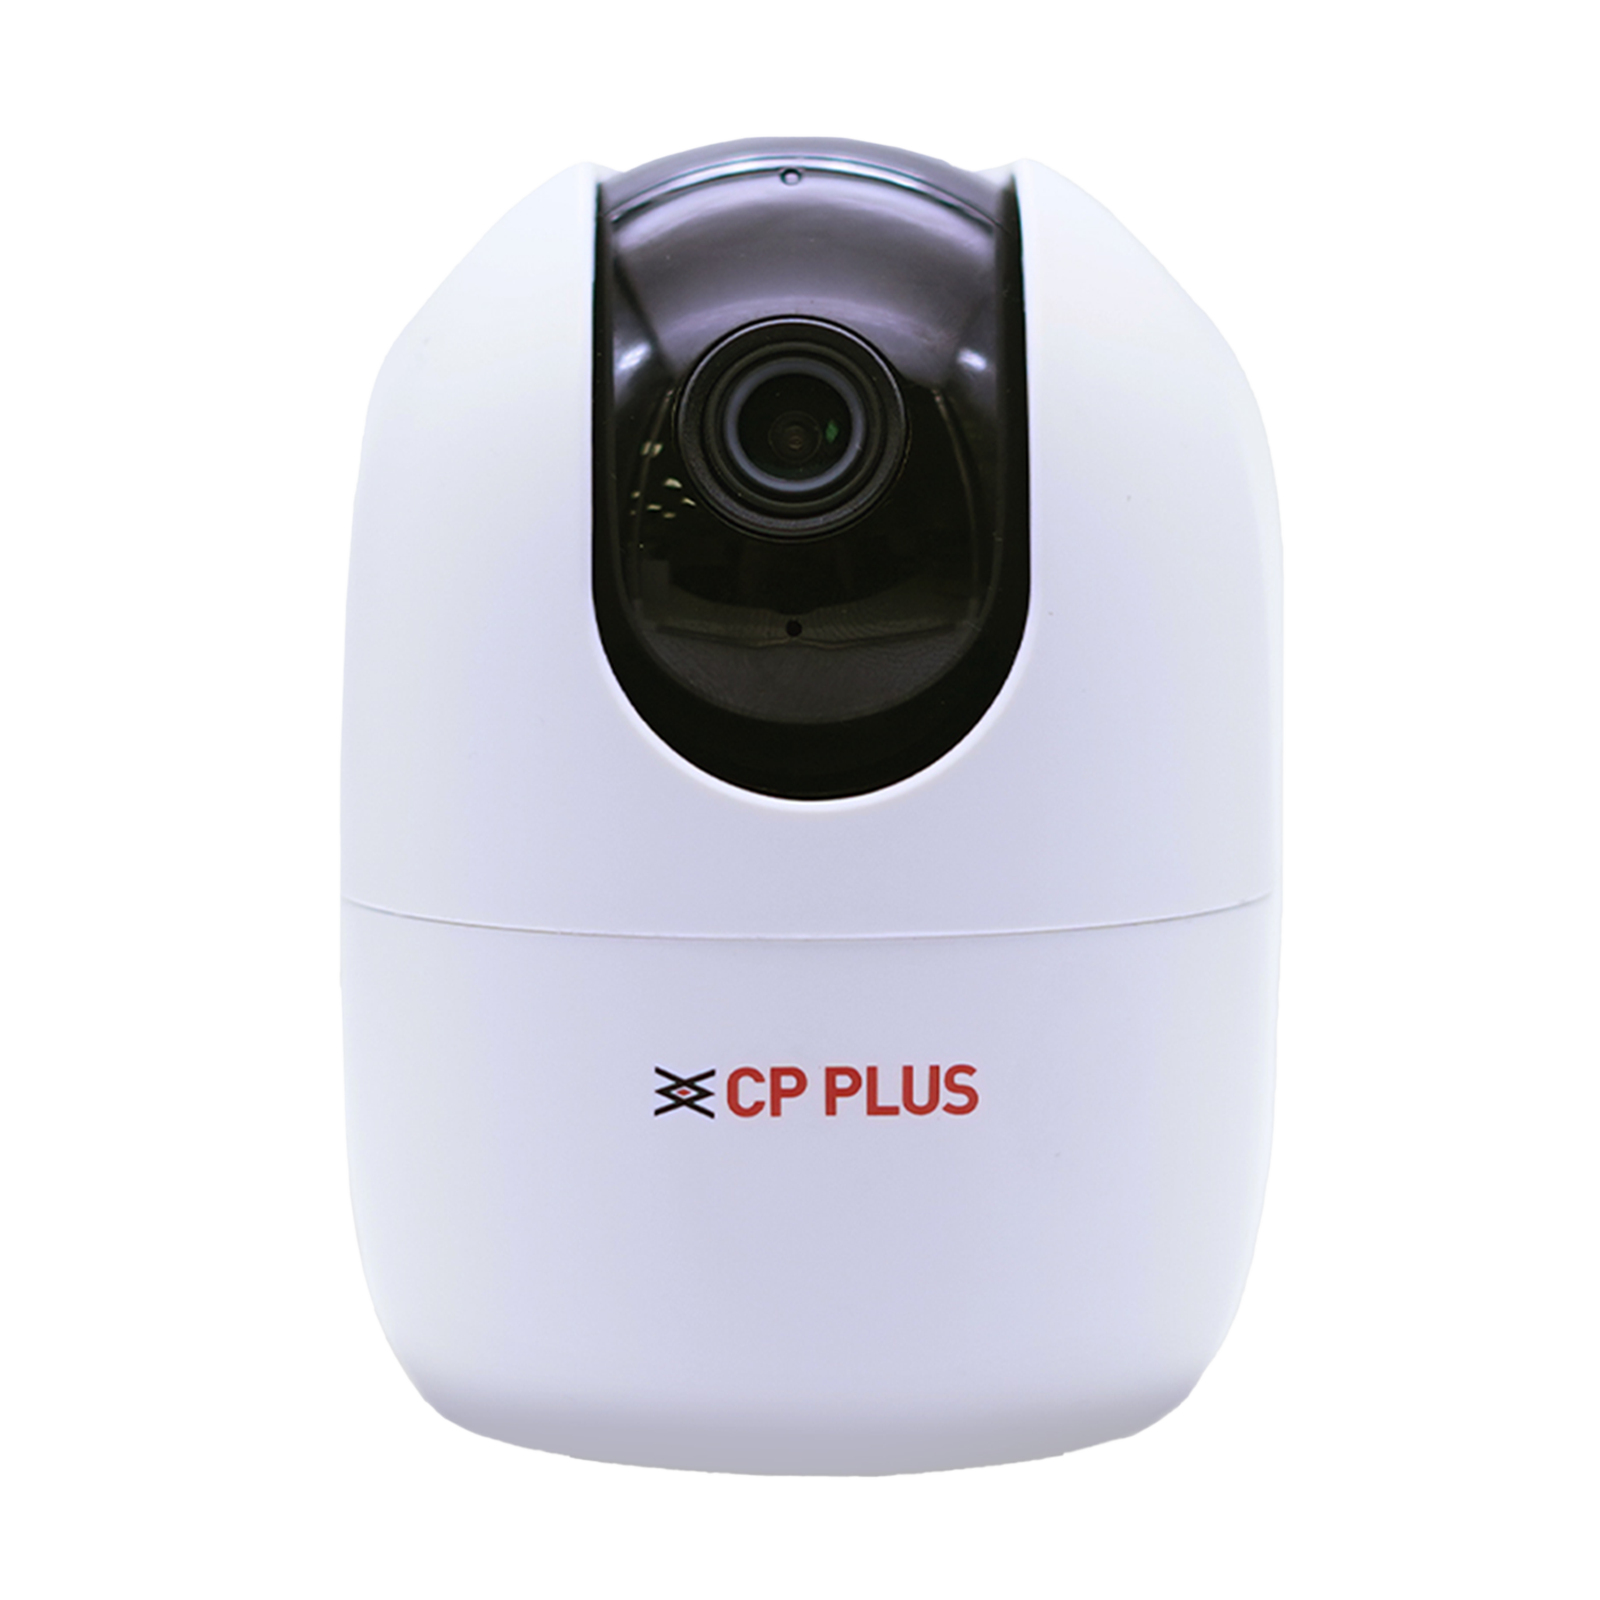 CP PLUS Eezo Smart CCTV Security Camera (Google Assistant Support, CP21, White)